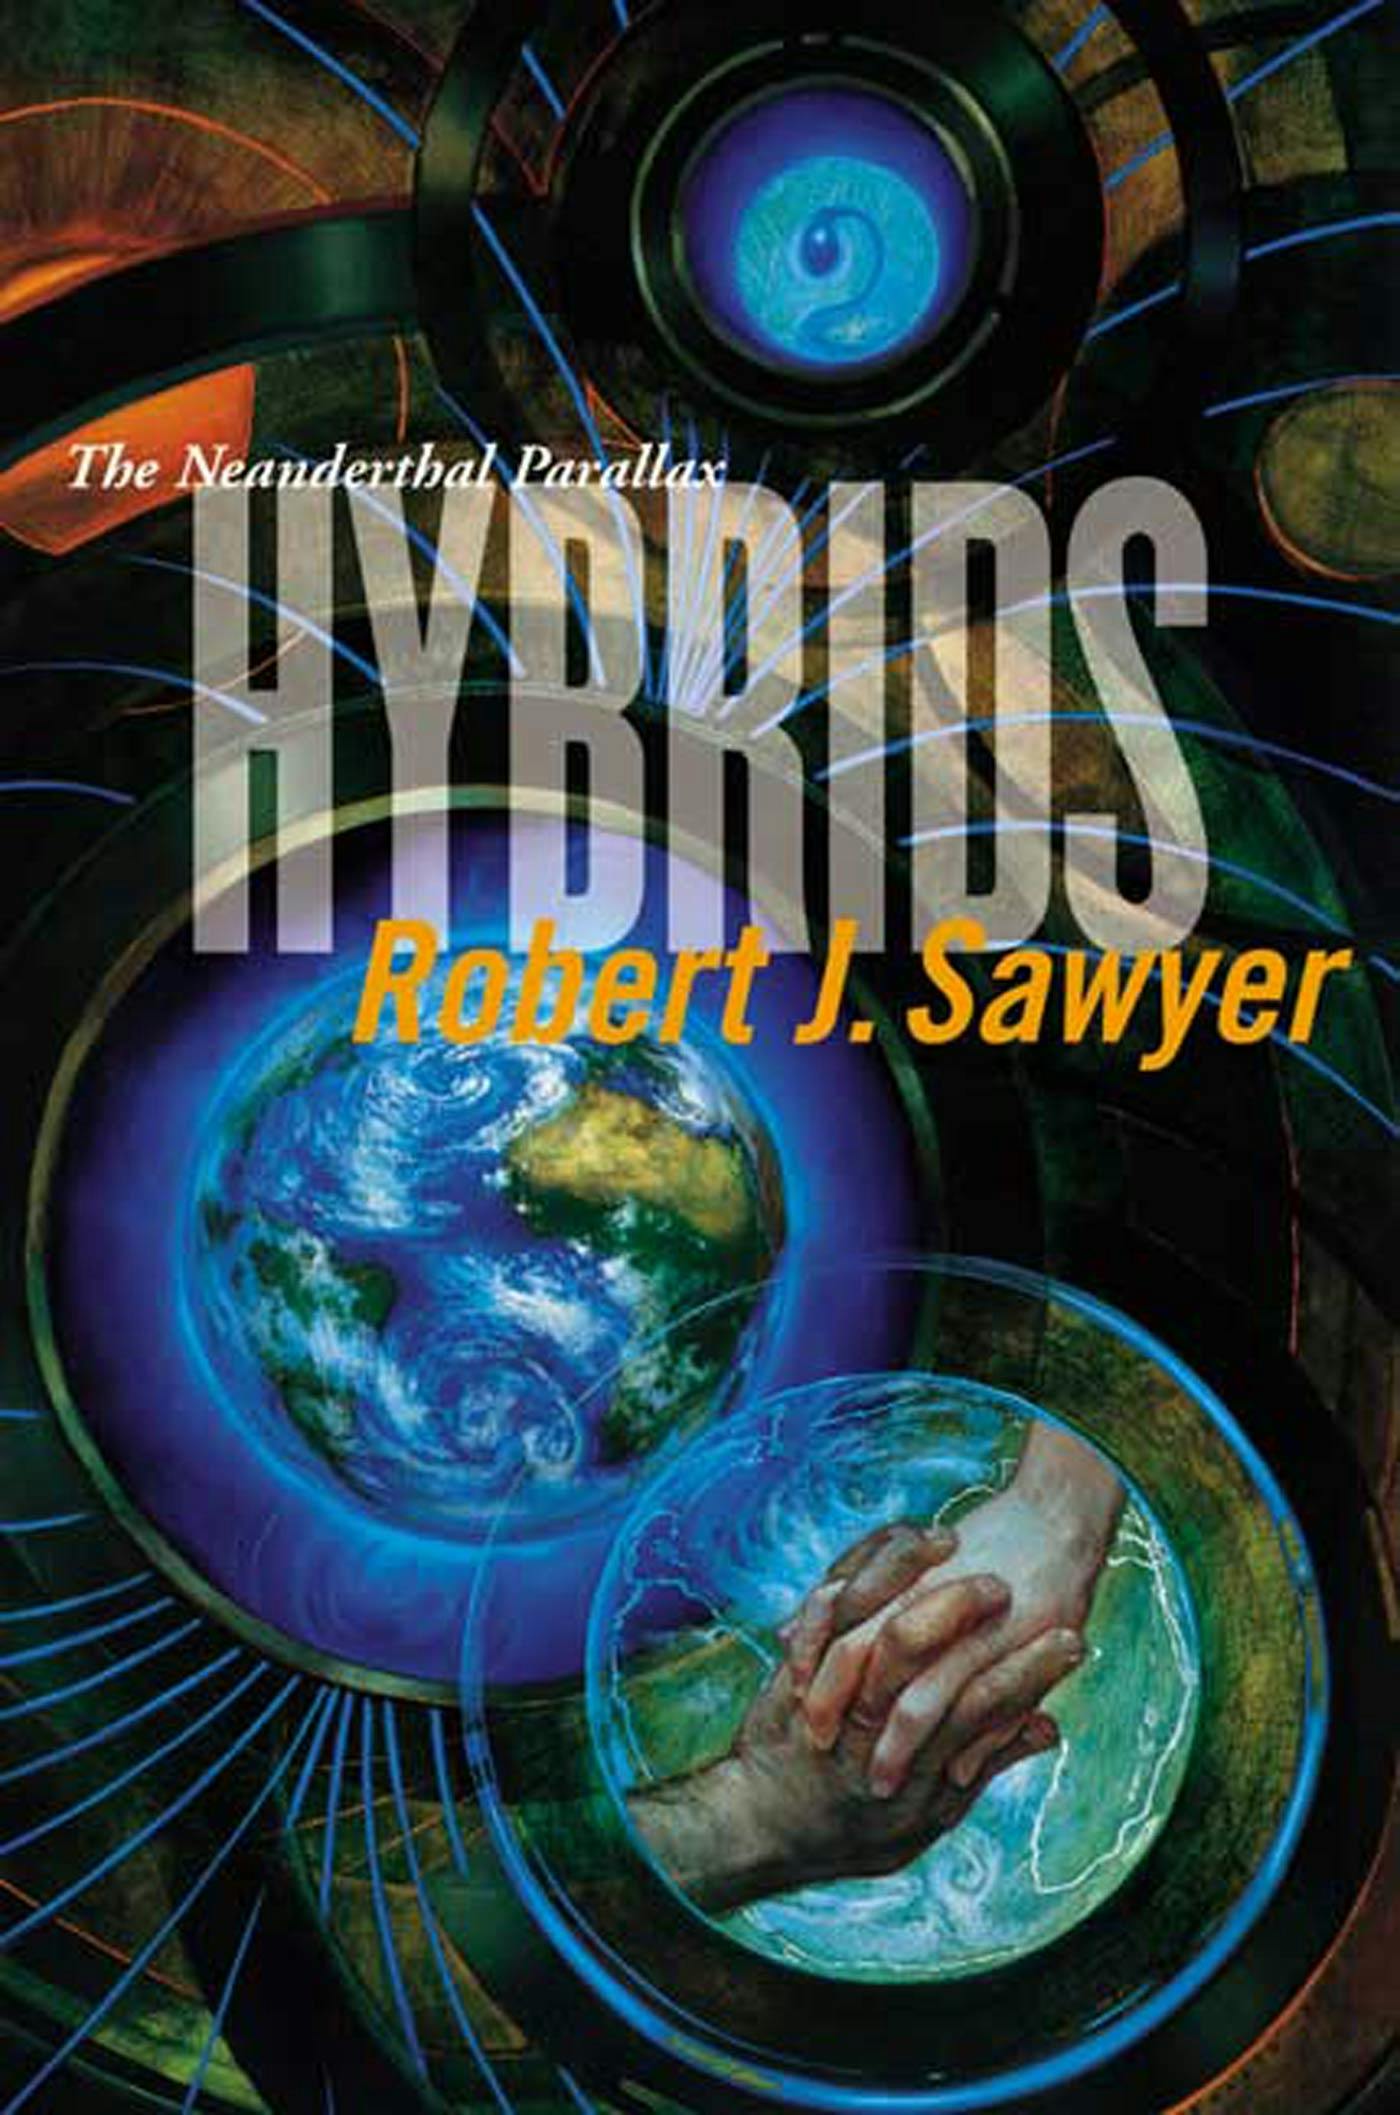 Cover for the book titled as: Hybrids